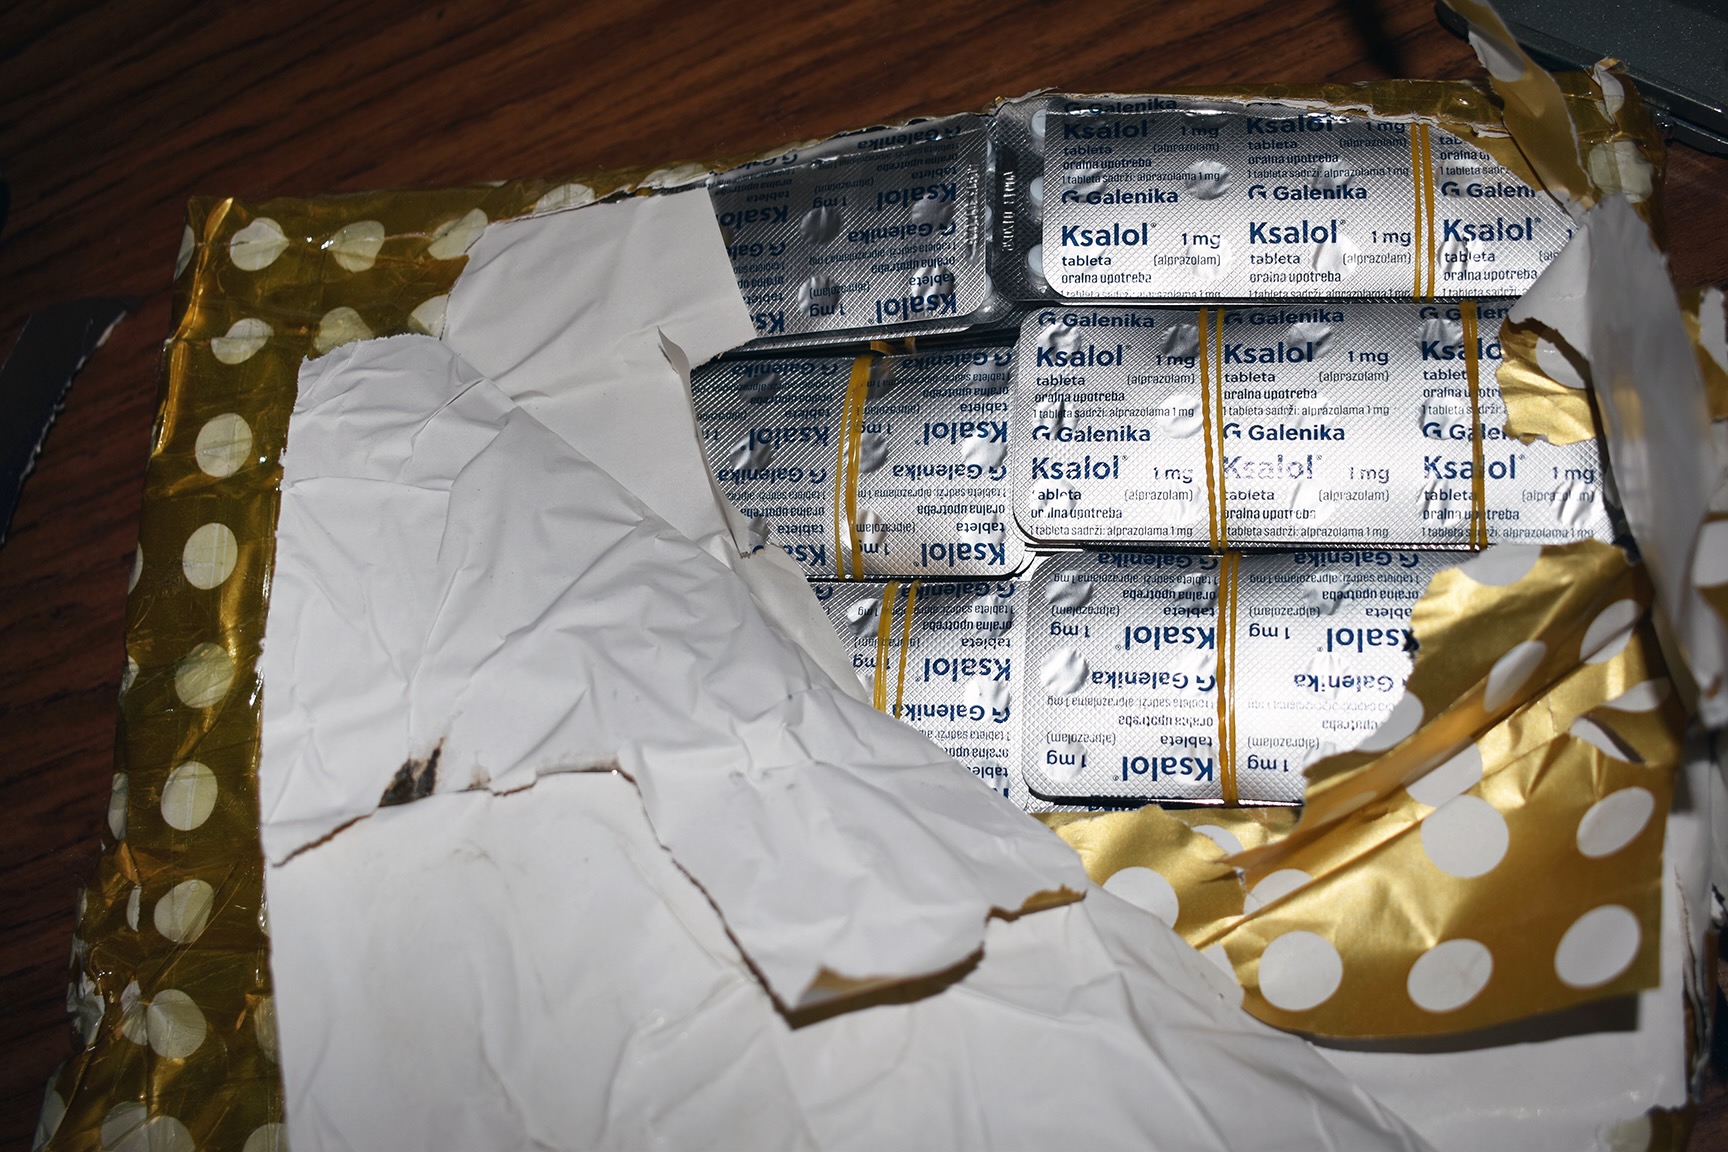 Customs agents seize wrapped gifts where thousands of Xanax and